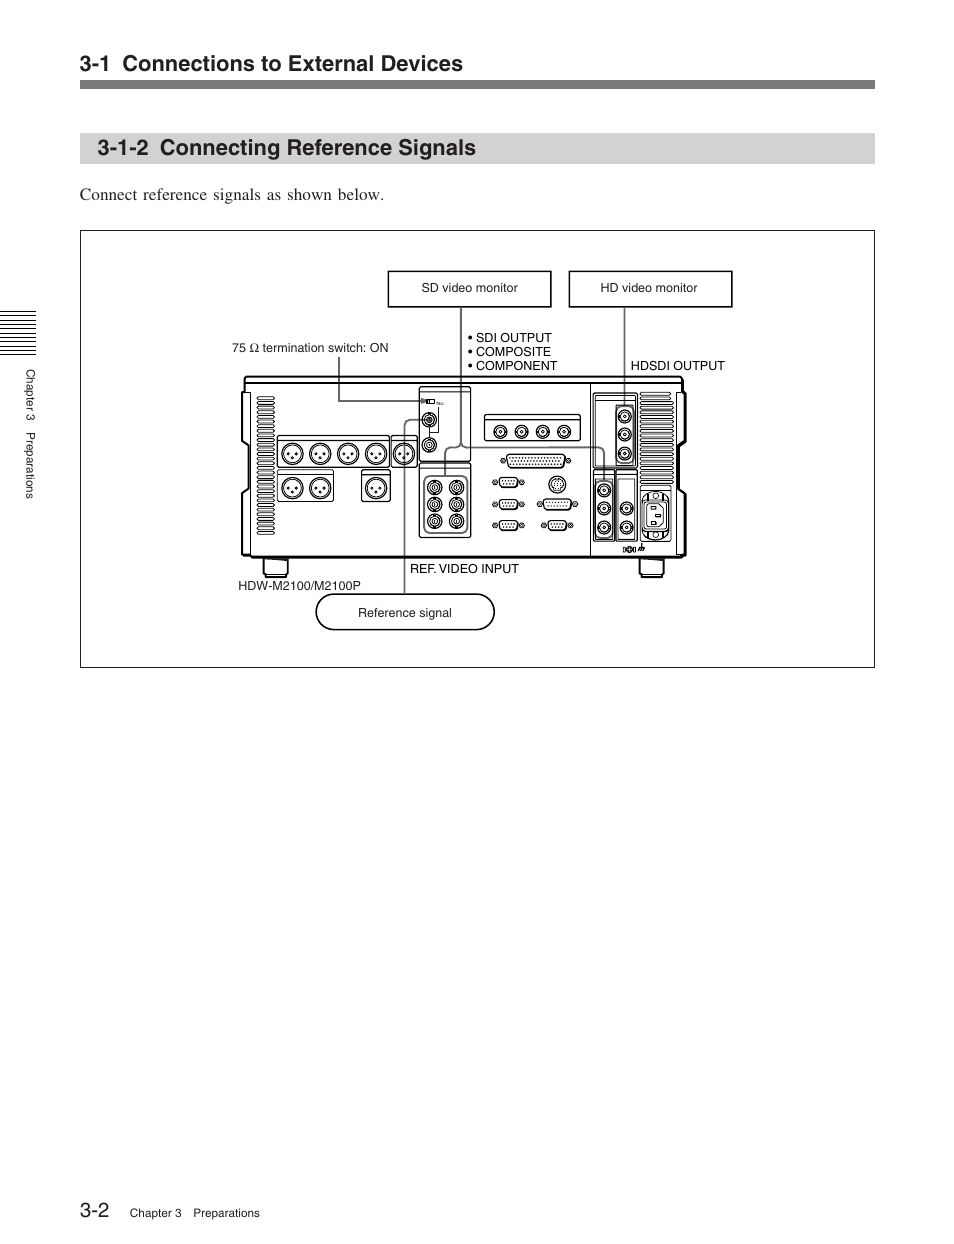 1-2 connecting reference signals, 1 connections to external devices, Connect reference signals as shown below | Sony HDW-M2100 User Manual | Page 26 / 115